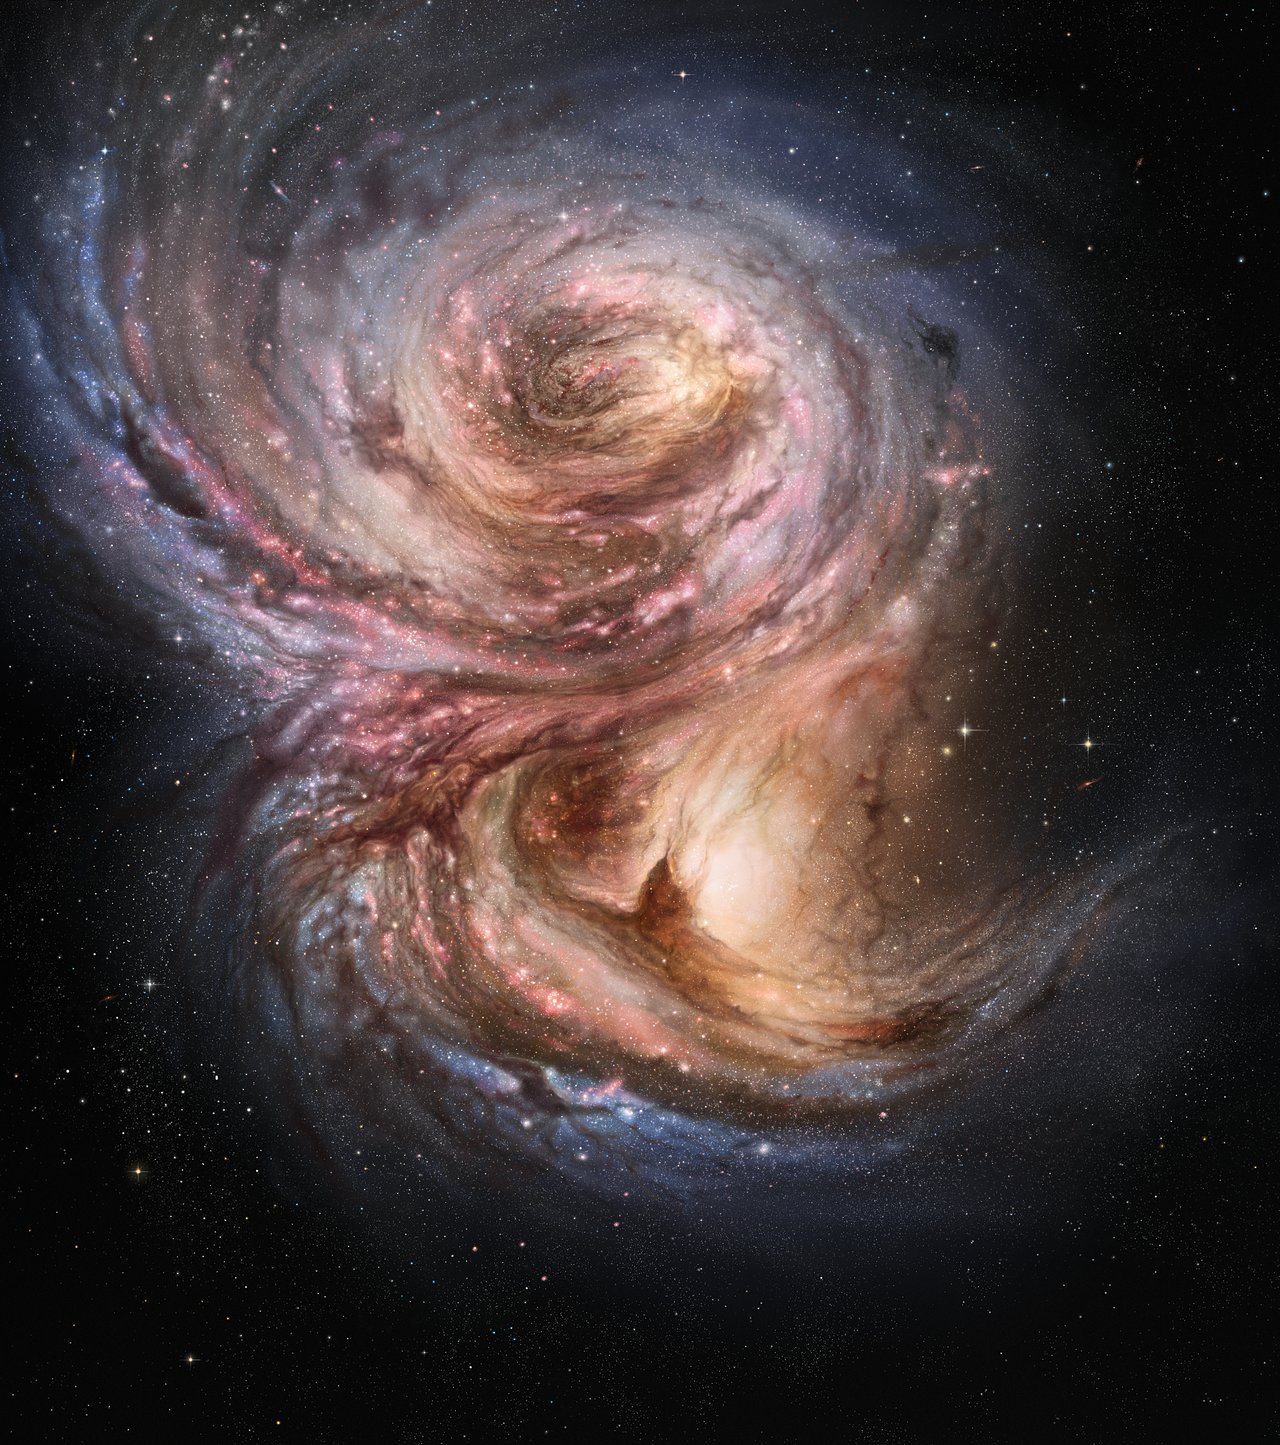 This artist’s impression of the distant galaxy SMM J2135-0102 shows large bright clouds a few hundred light-years in size, which are regions of active star formation. These “star factories” are similar in size to those in the Milky Way, but one hundred times more luminous, suggesting that star formation in the early life of these galaxies is a much more vigorous process than typically found in local galaxies.